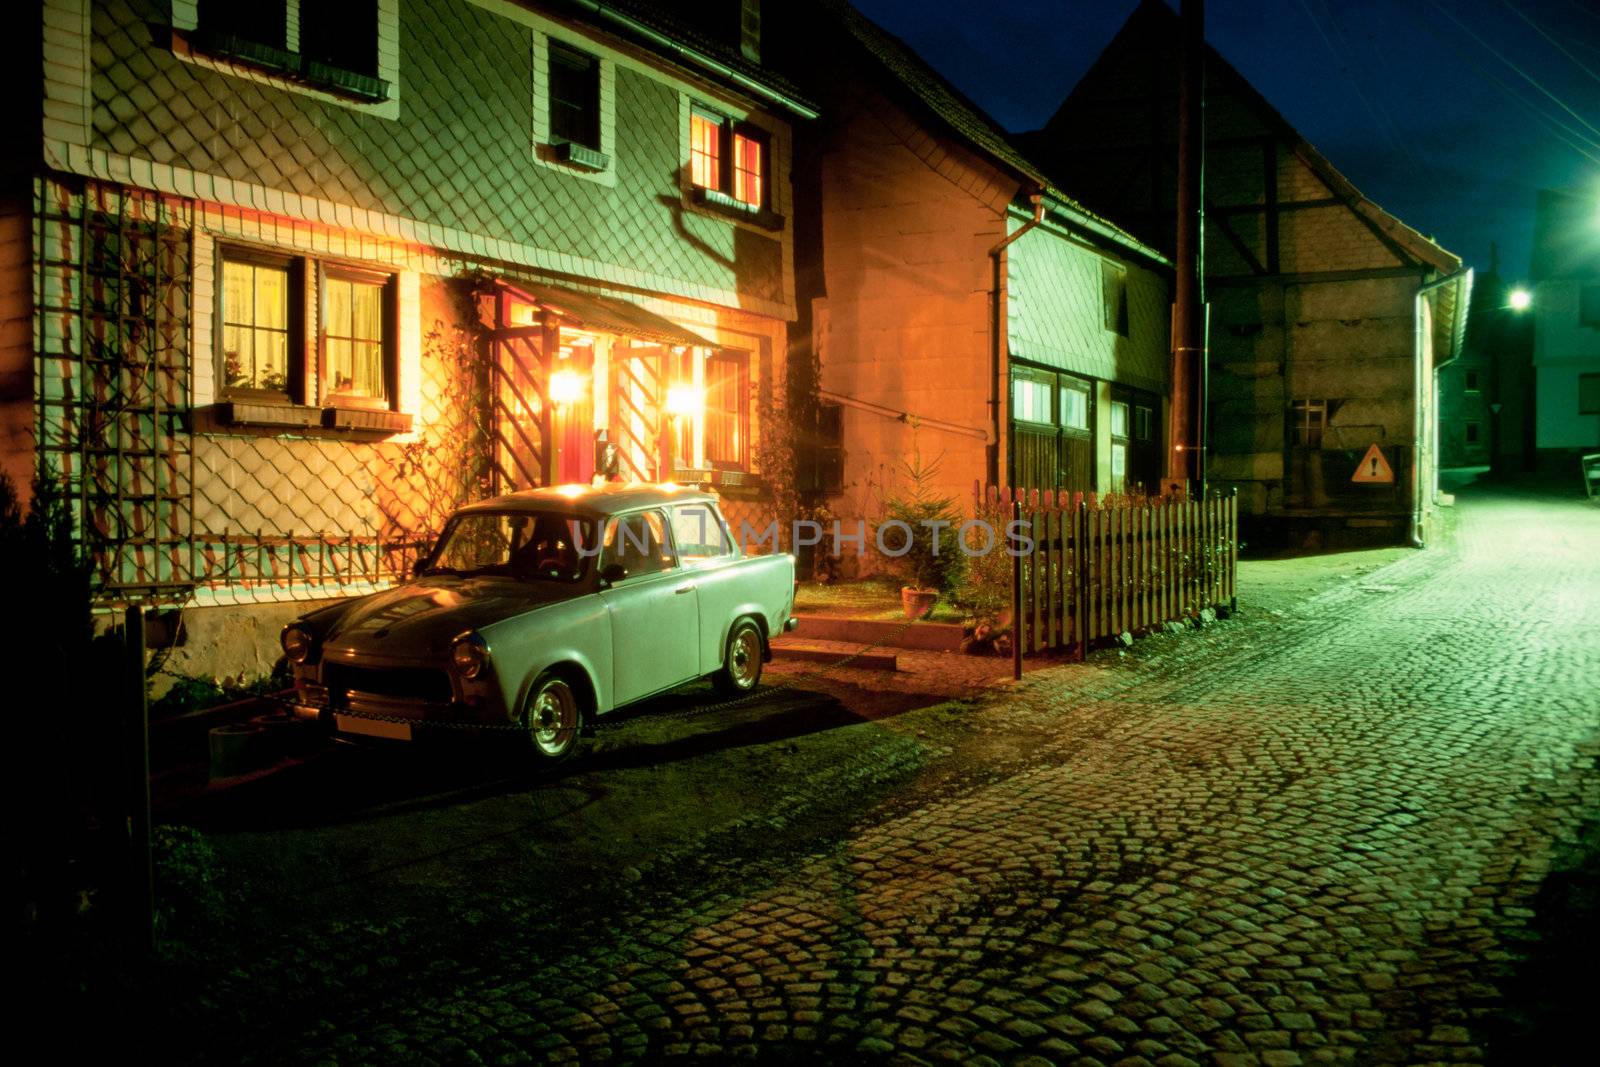 At night in a small village in Thuringia, Eastern Germany, a few years after reunification.